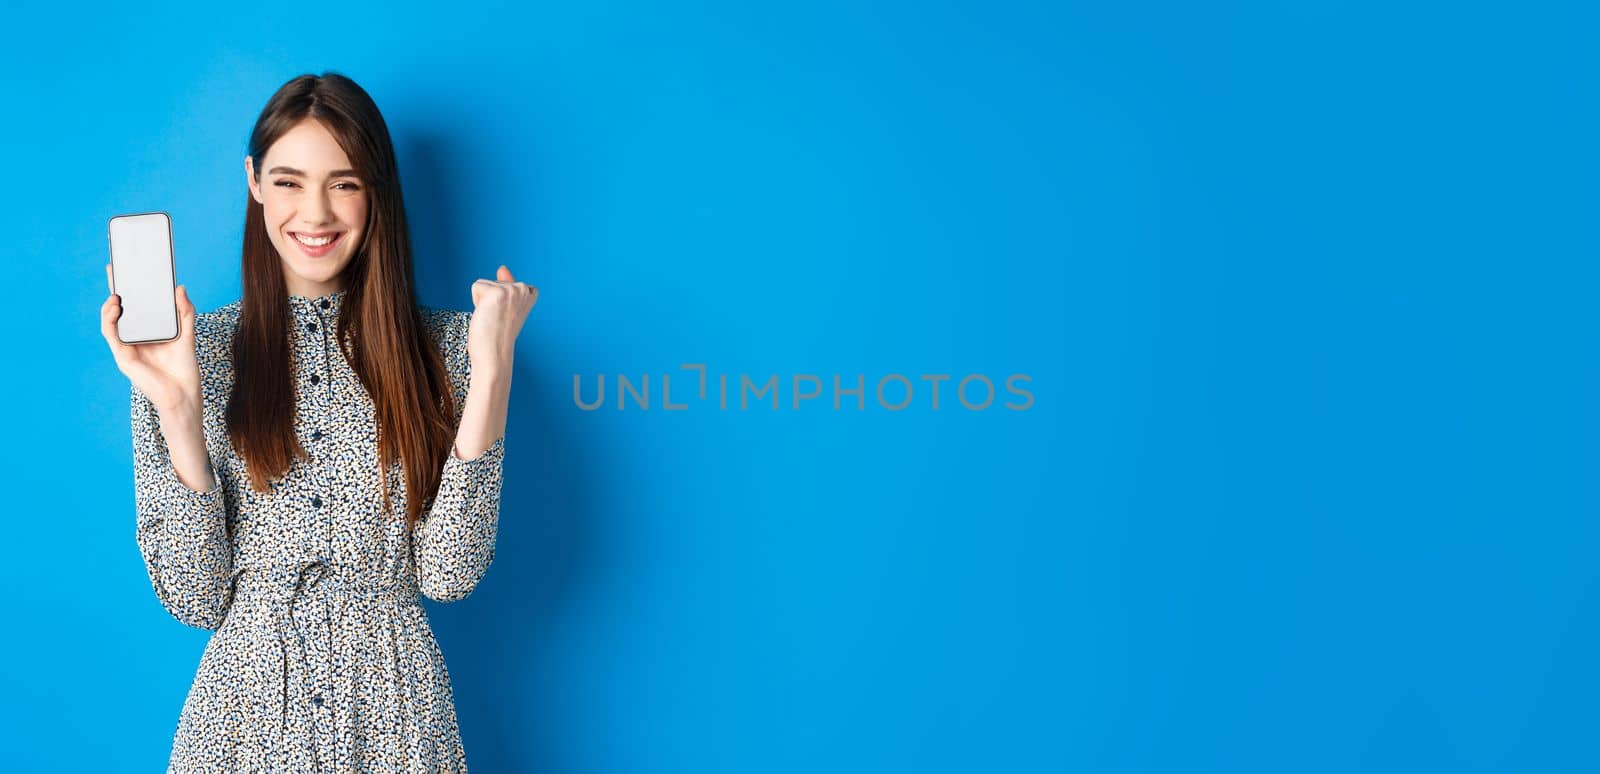 Cheerful pretty girl chanting, winning on mobile phone, showing empty smartphone screen and fist pump, smiling and celebrating, blue background.